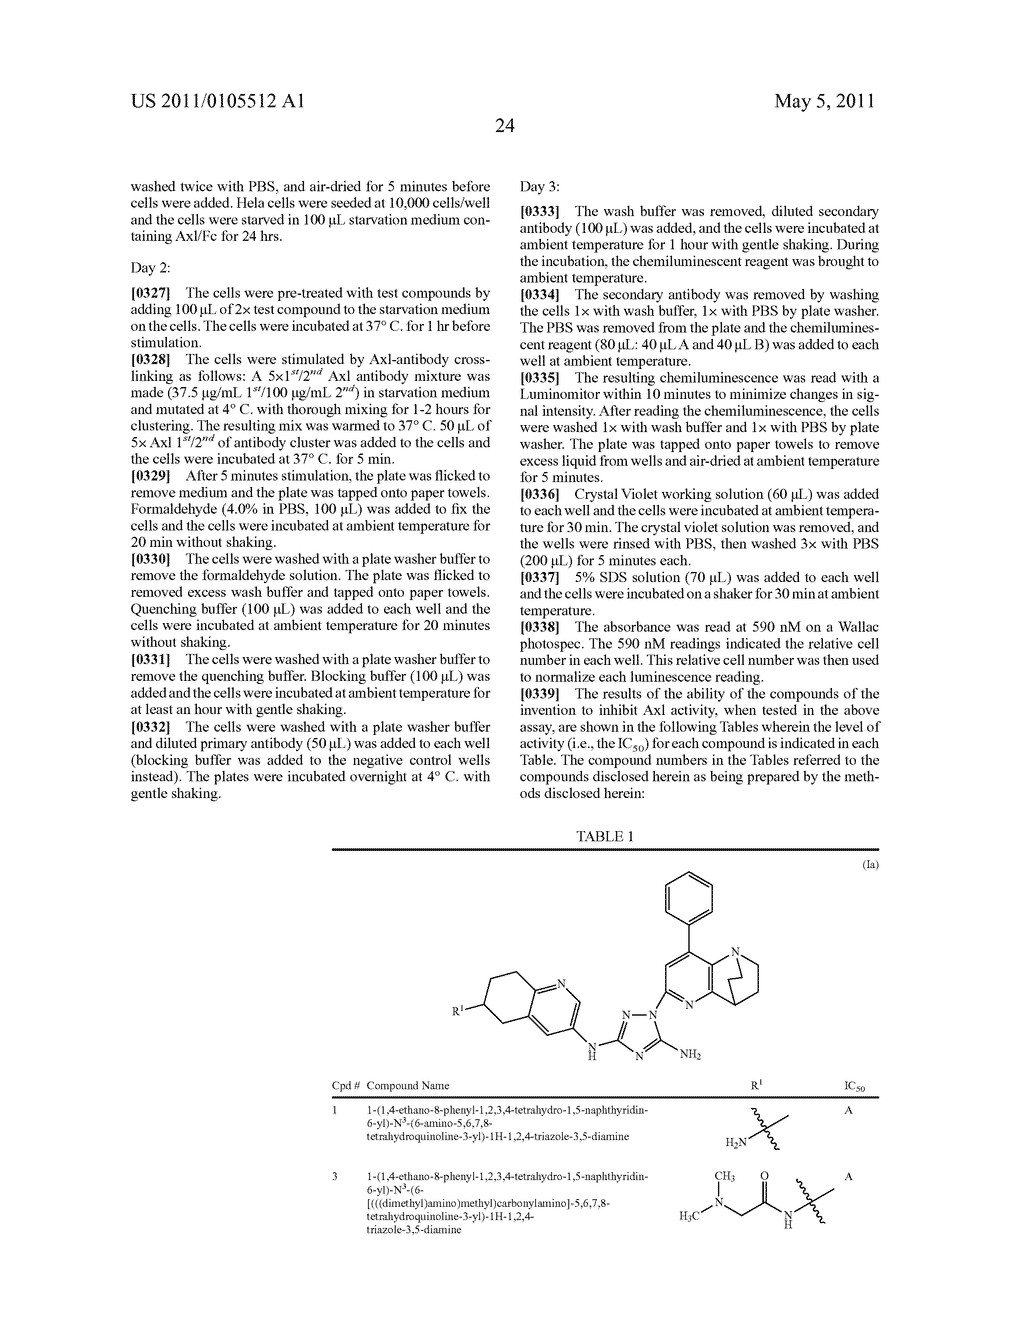 BRIDGED BICYCLIC HETEROARYL SUBSTITUTED TRIAZOLES USEFUL AS AXL INHIBITORS - diagram, schematic, and image 25